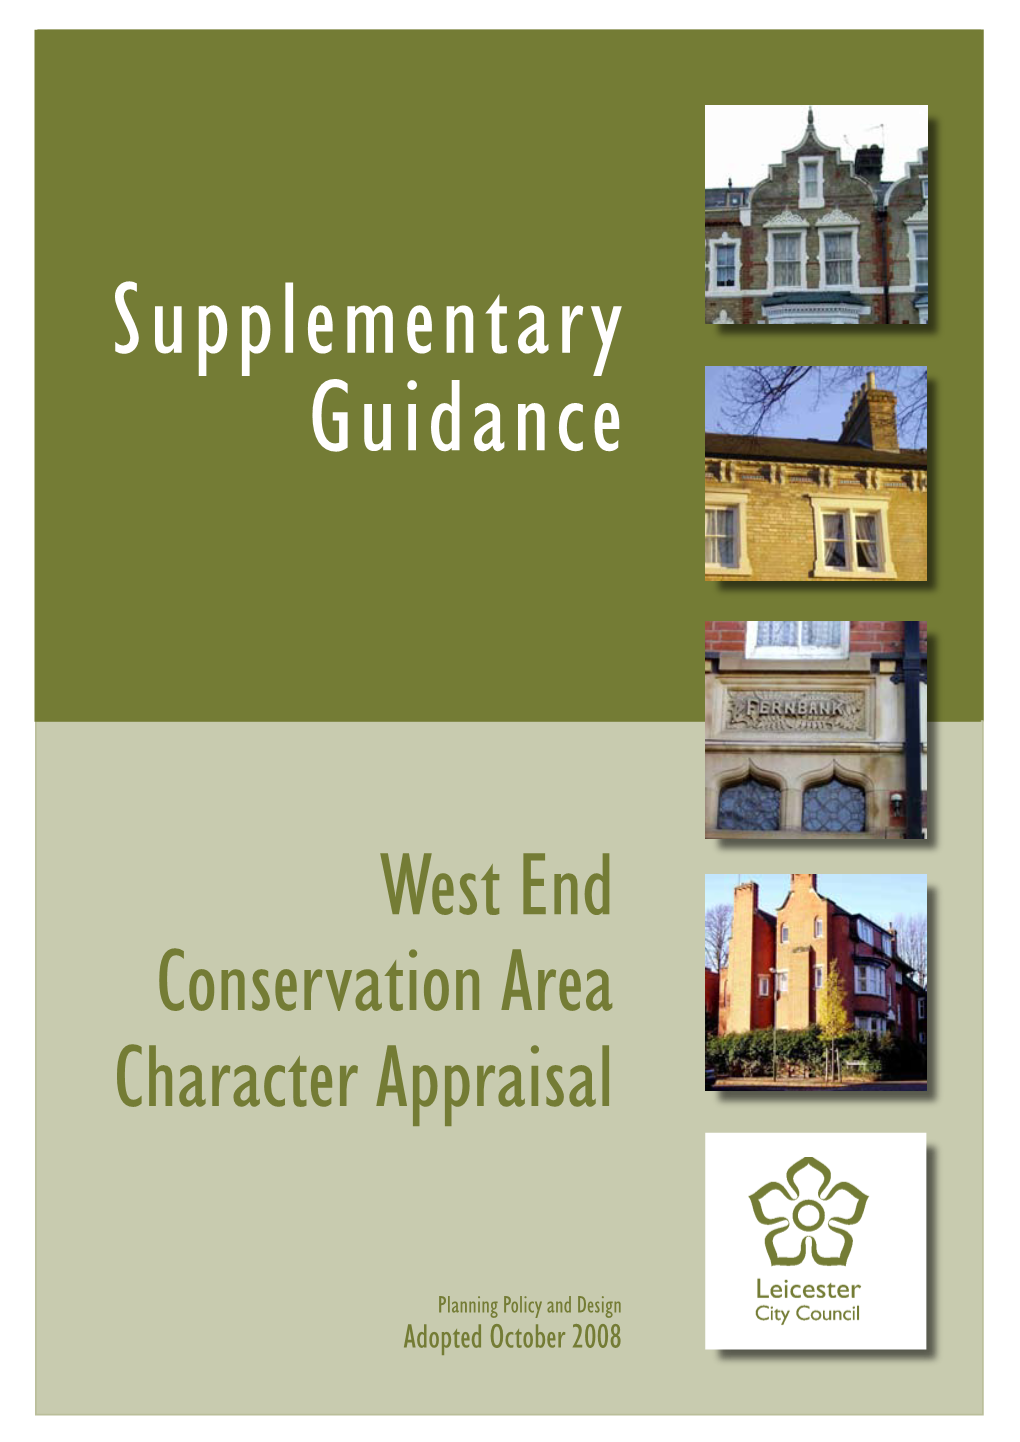 West End Conservation Area Character Appraisal